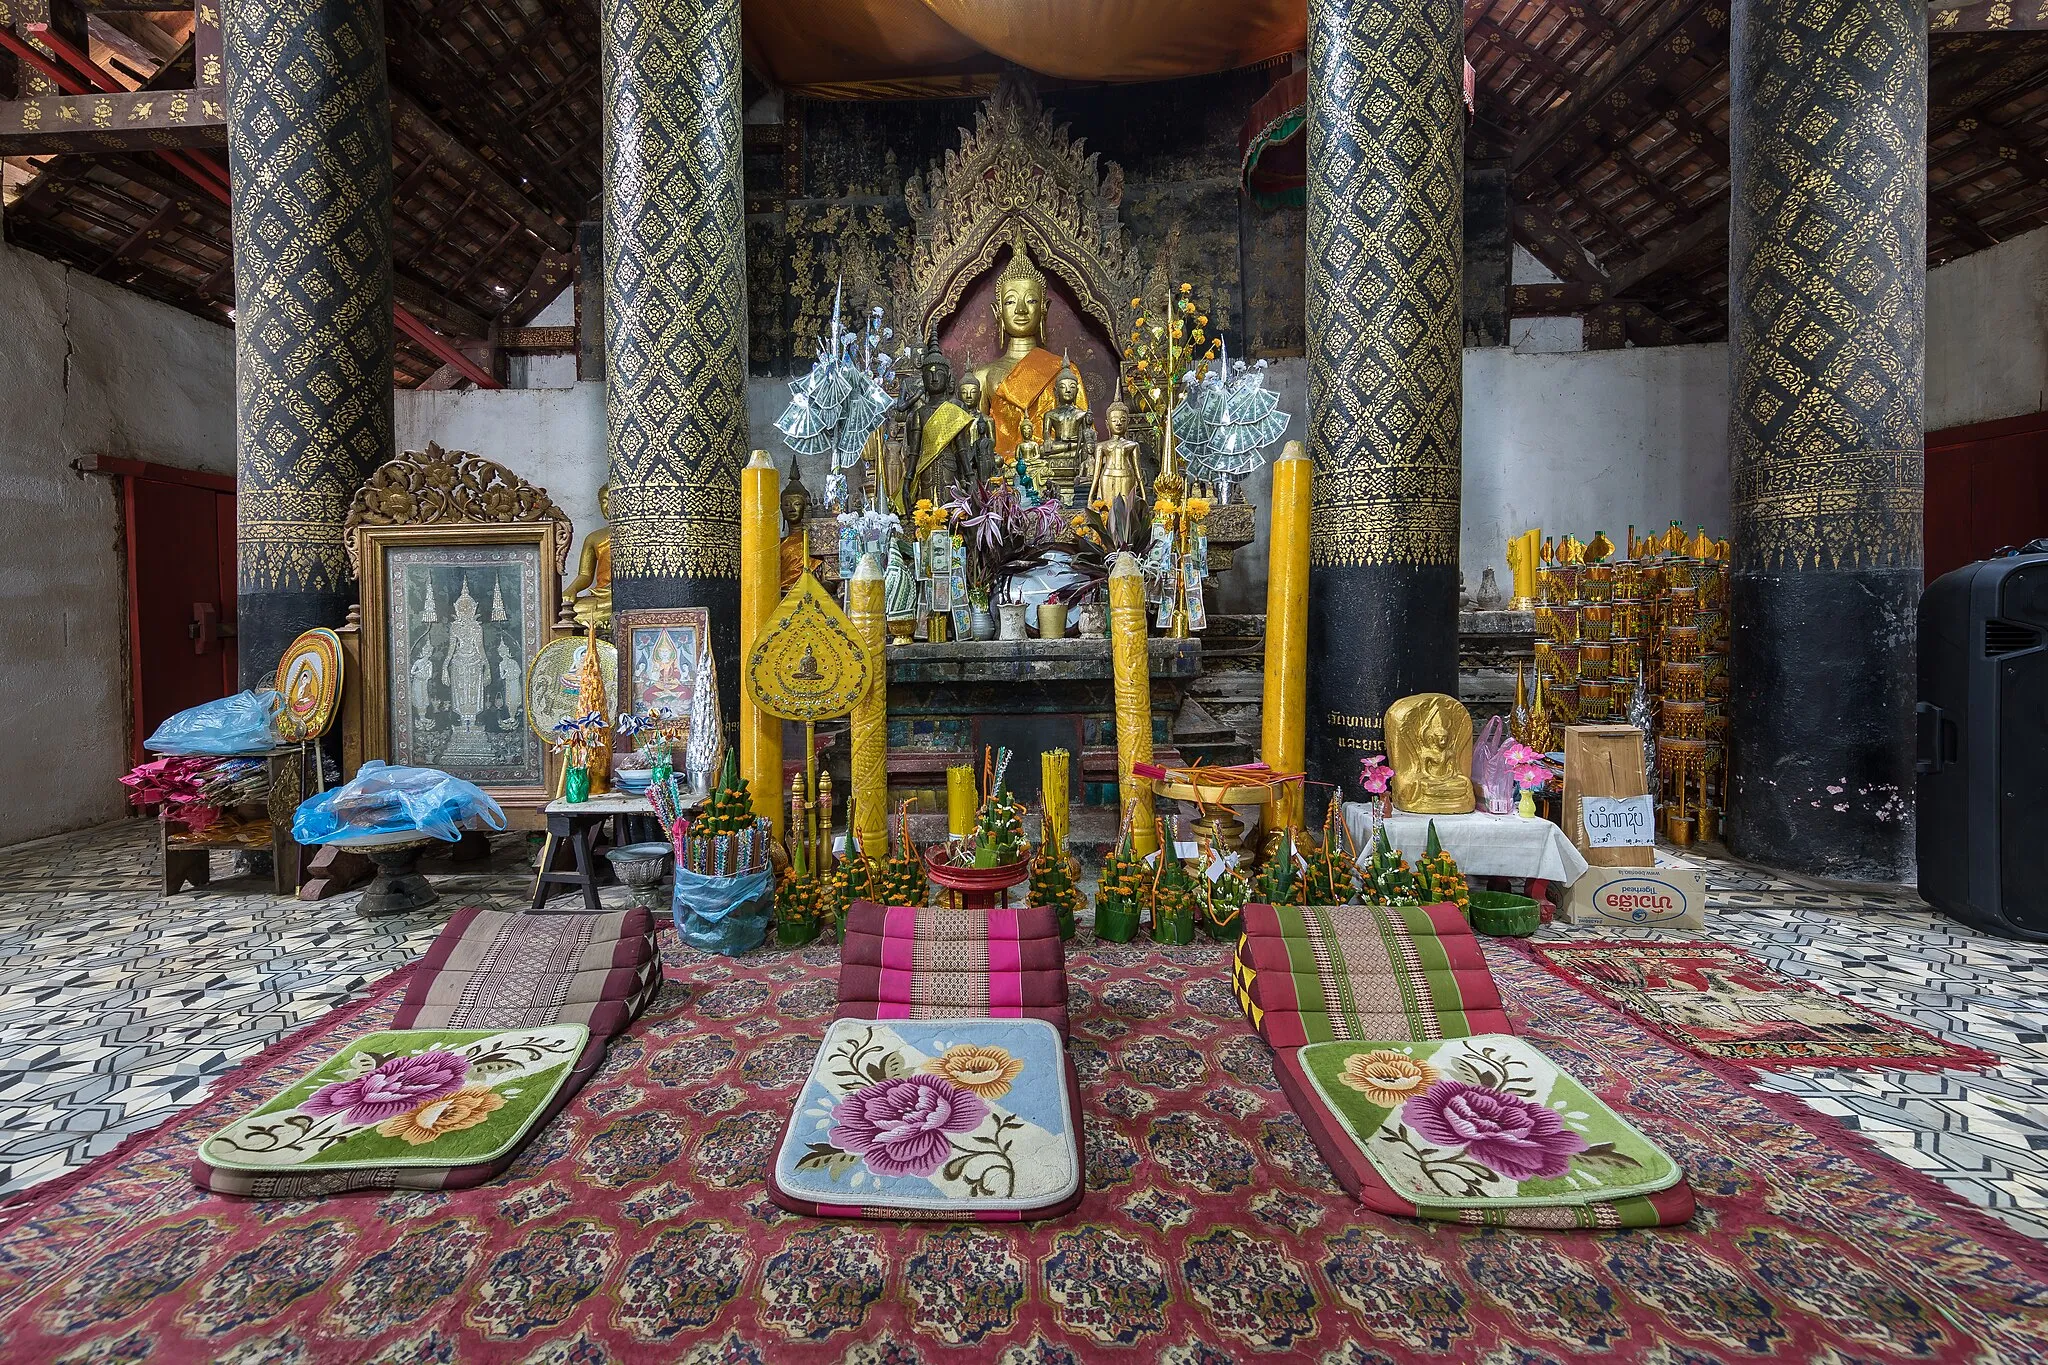 Photo showing: Praying area inside the temple Wat Jom Phet of Luang Prabang (Laos), with painted pillars, a golden statue of the Buddha, big yellow candles, and three triangle prayer cushions